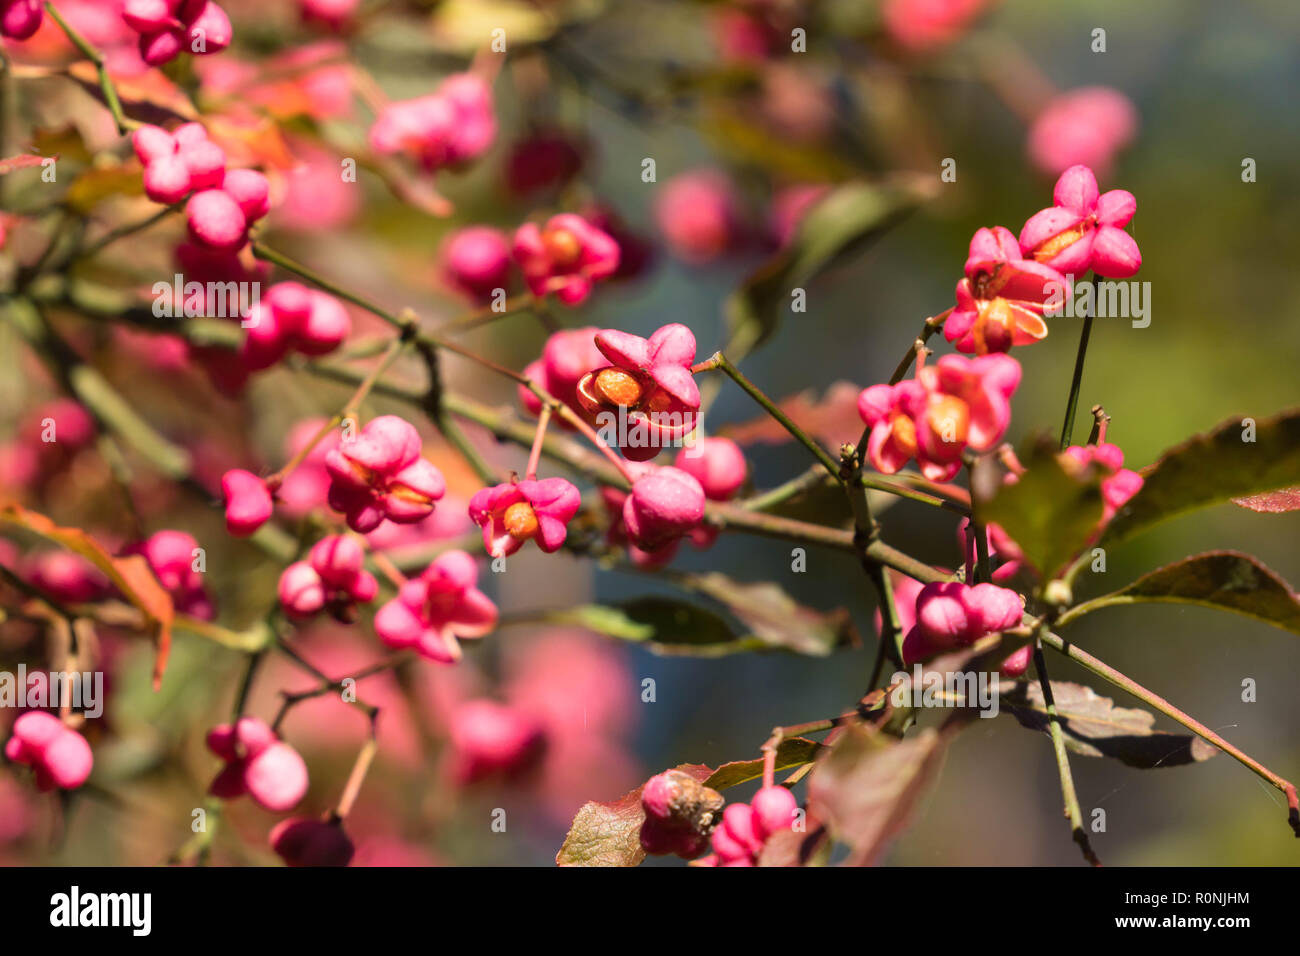 Fruit of the Common Spindle tree (Euonymus europaeus) on a nature reserve in the Herefordshire UK countryside. Stock Photo